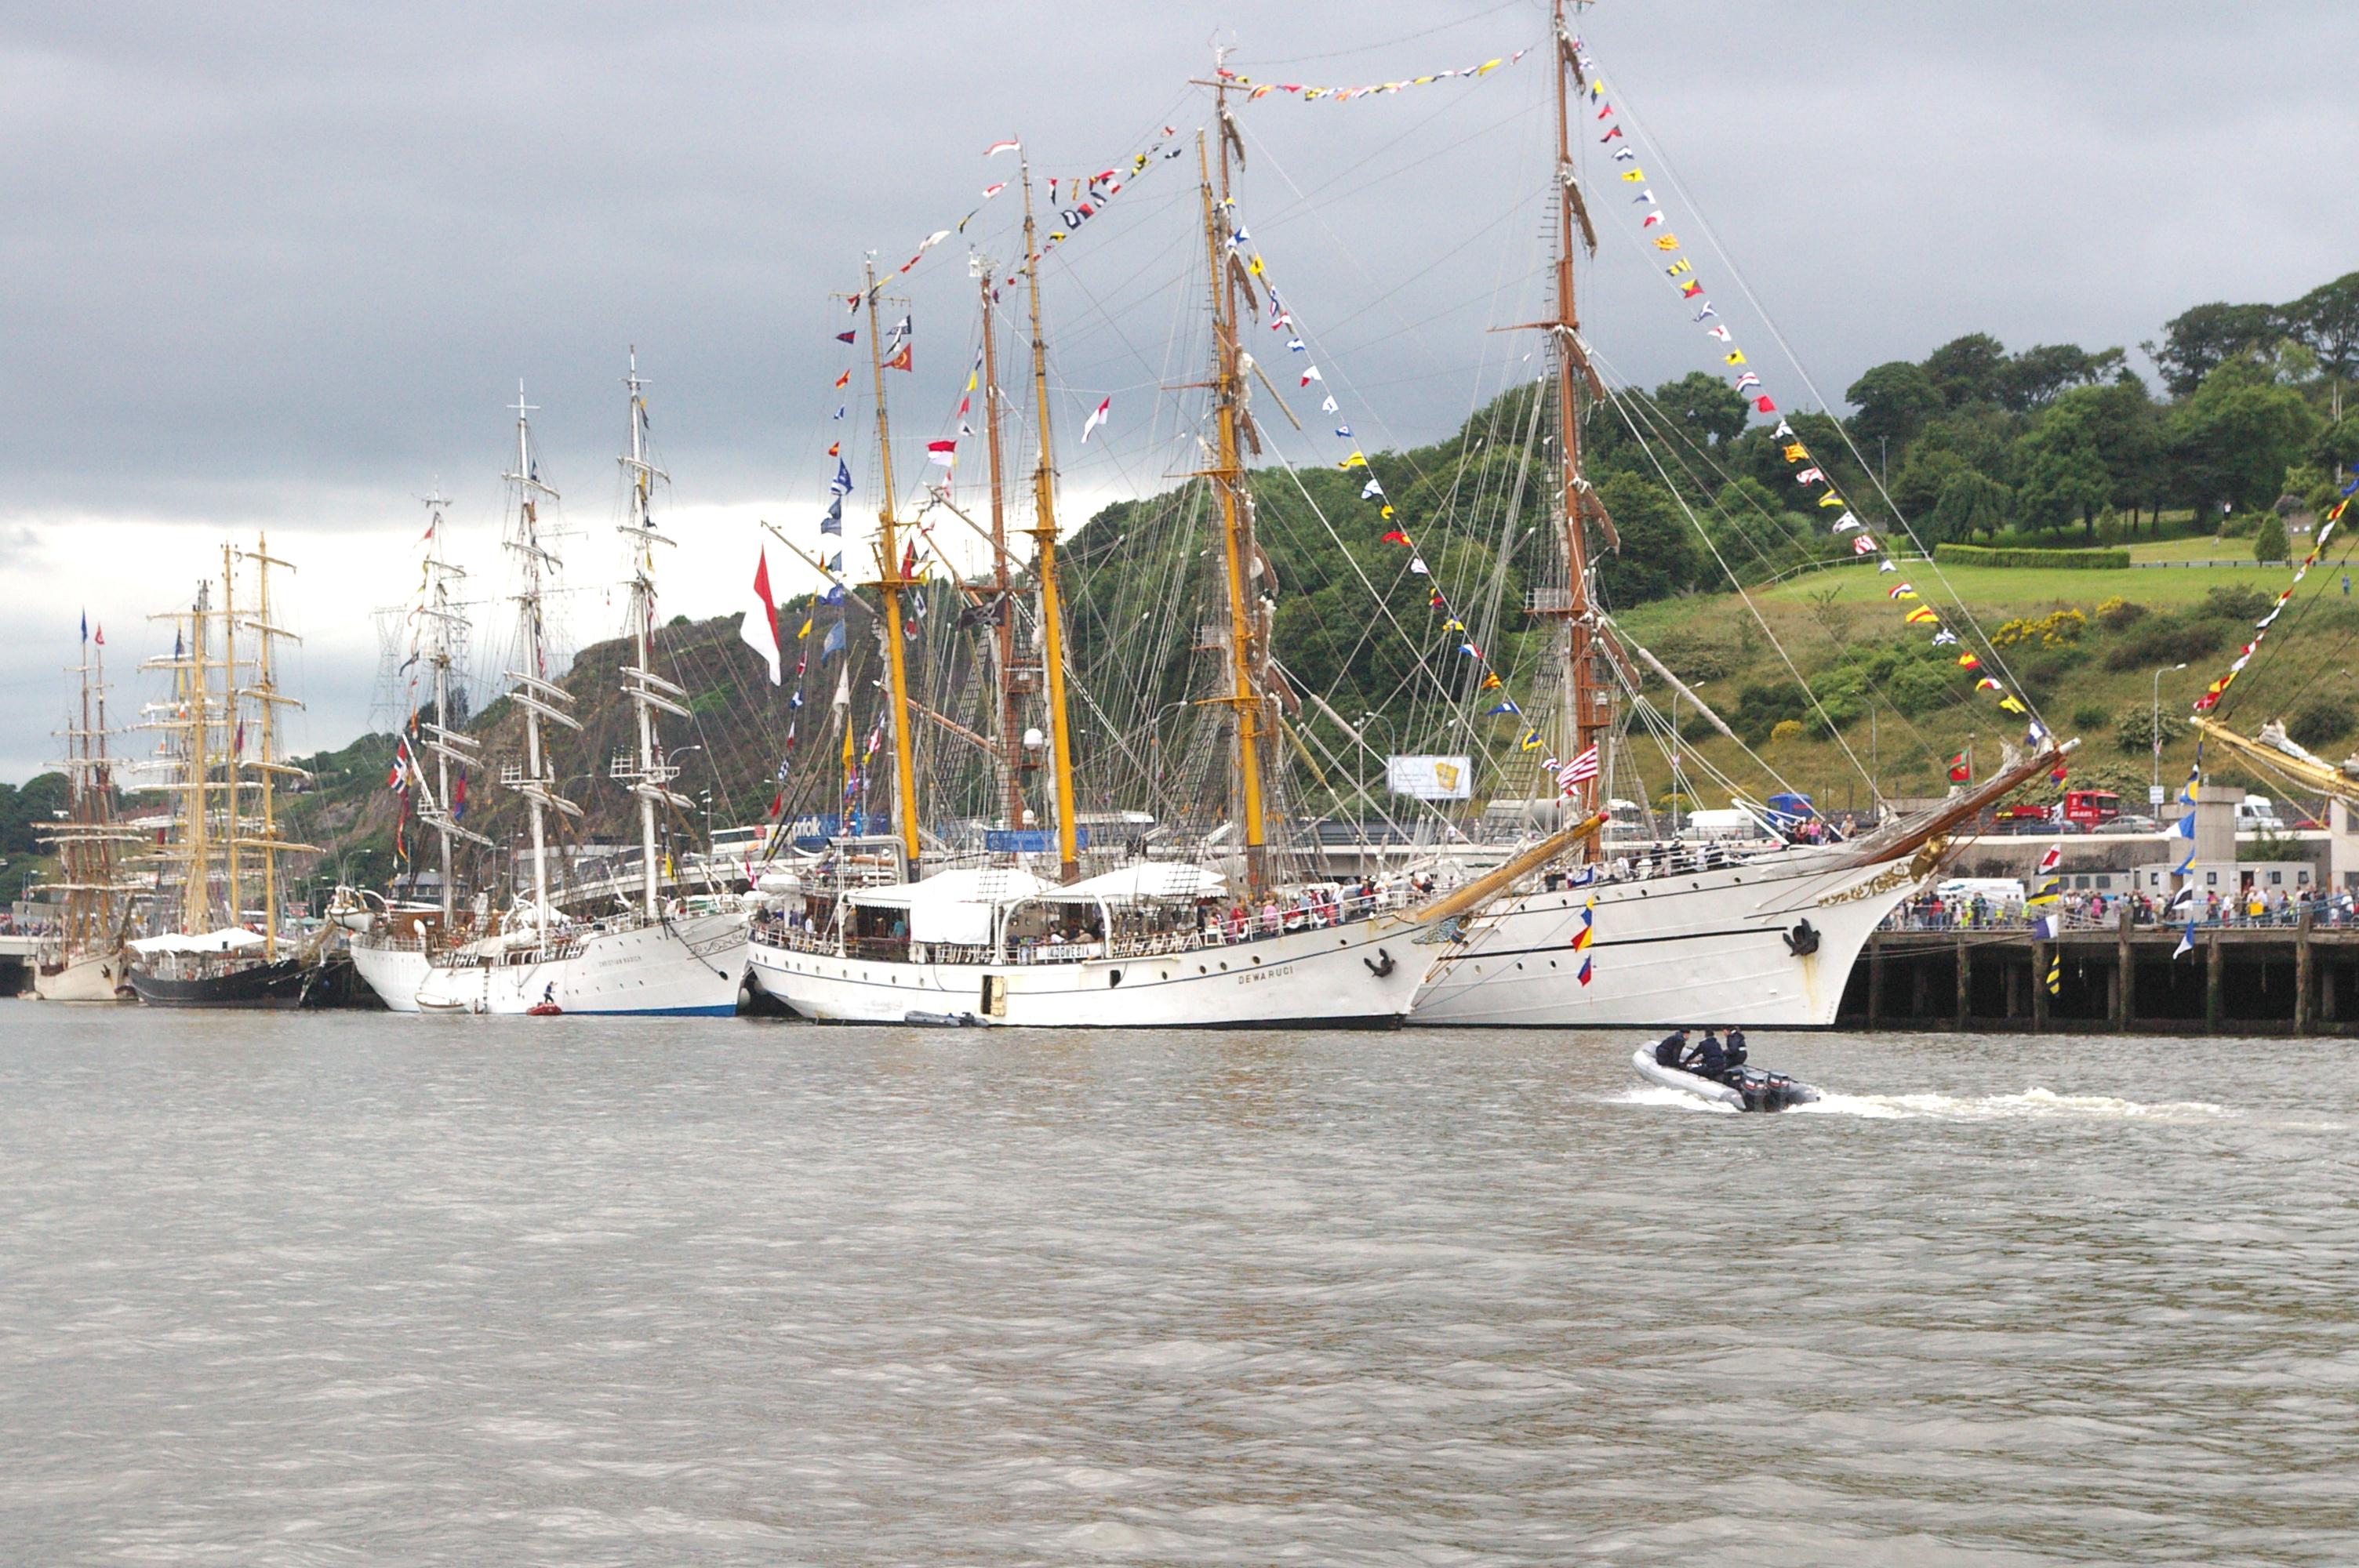 Some of the larger tall ships in Waterford